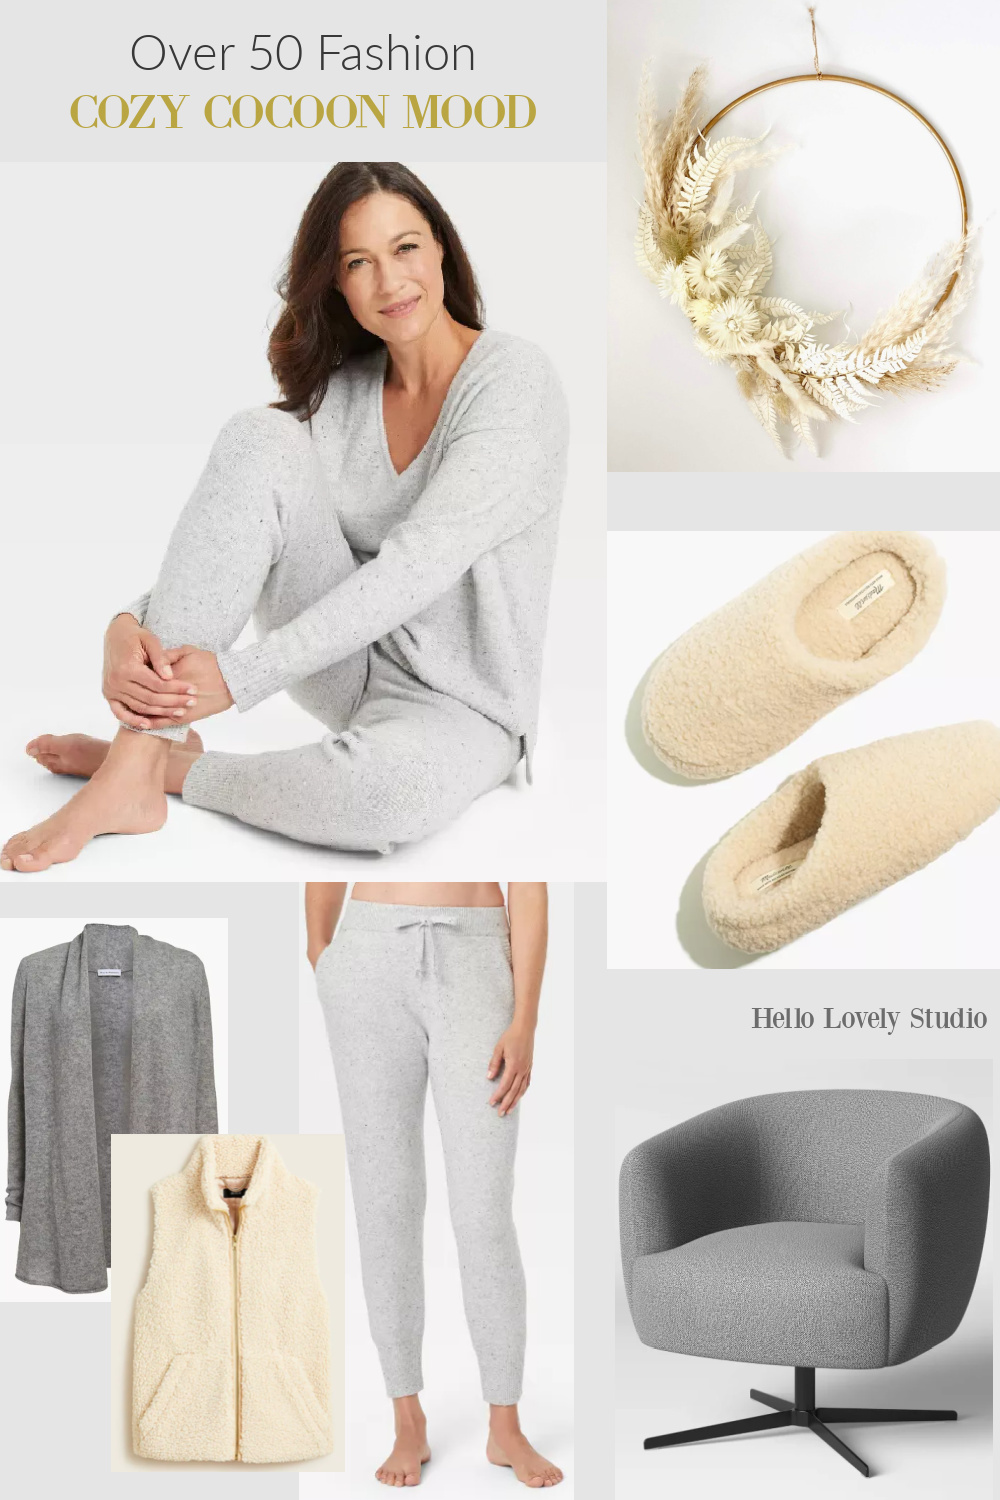 Over 50 Fashion Cozy Cocoon Mood Hello Lovely Studio - come discover lounging casual pieces to wear and decorate.